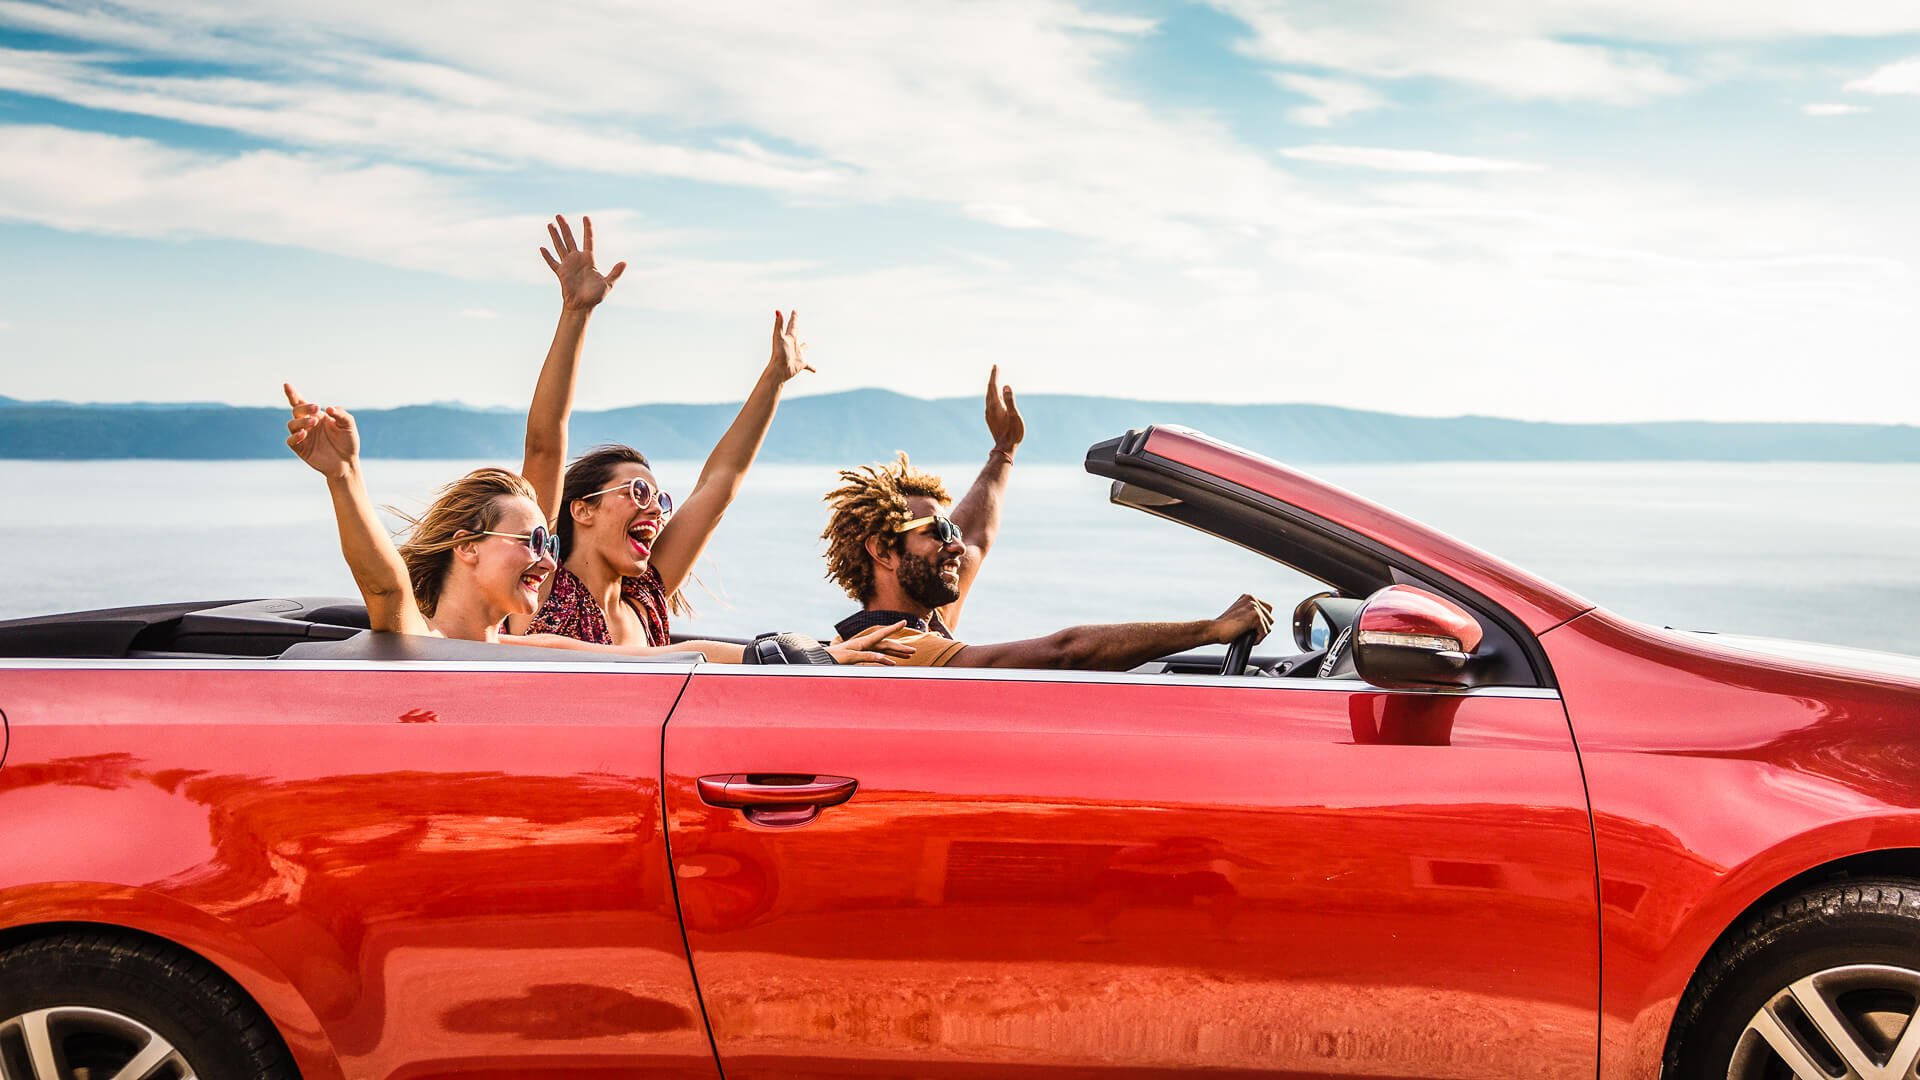 10 Tips for Keeping Your Summer Road Trip Affordable